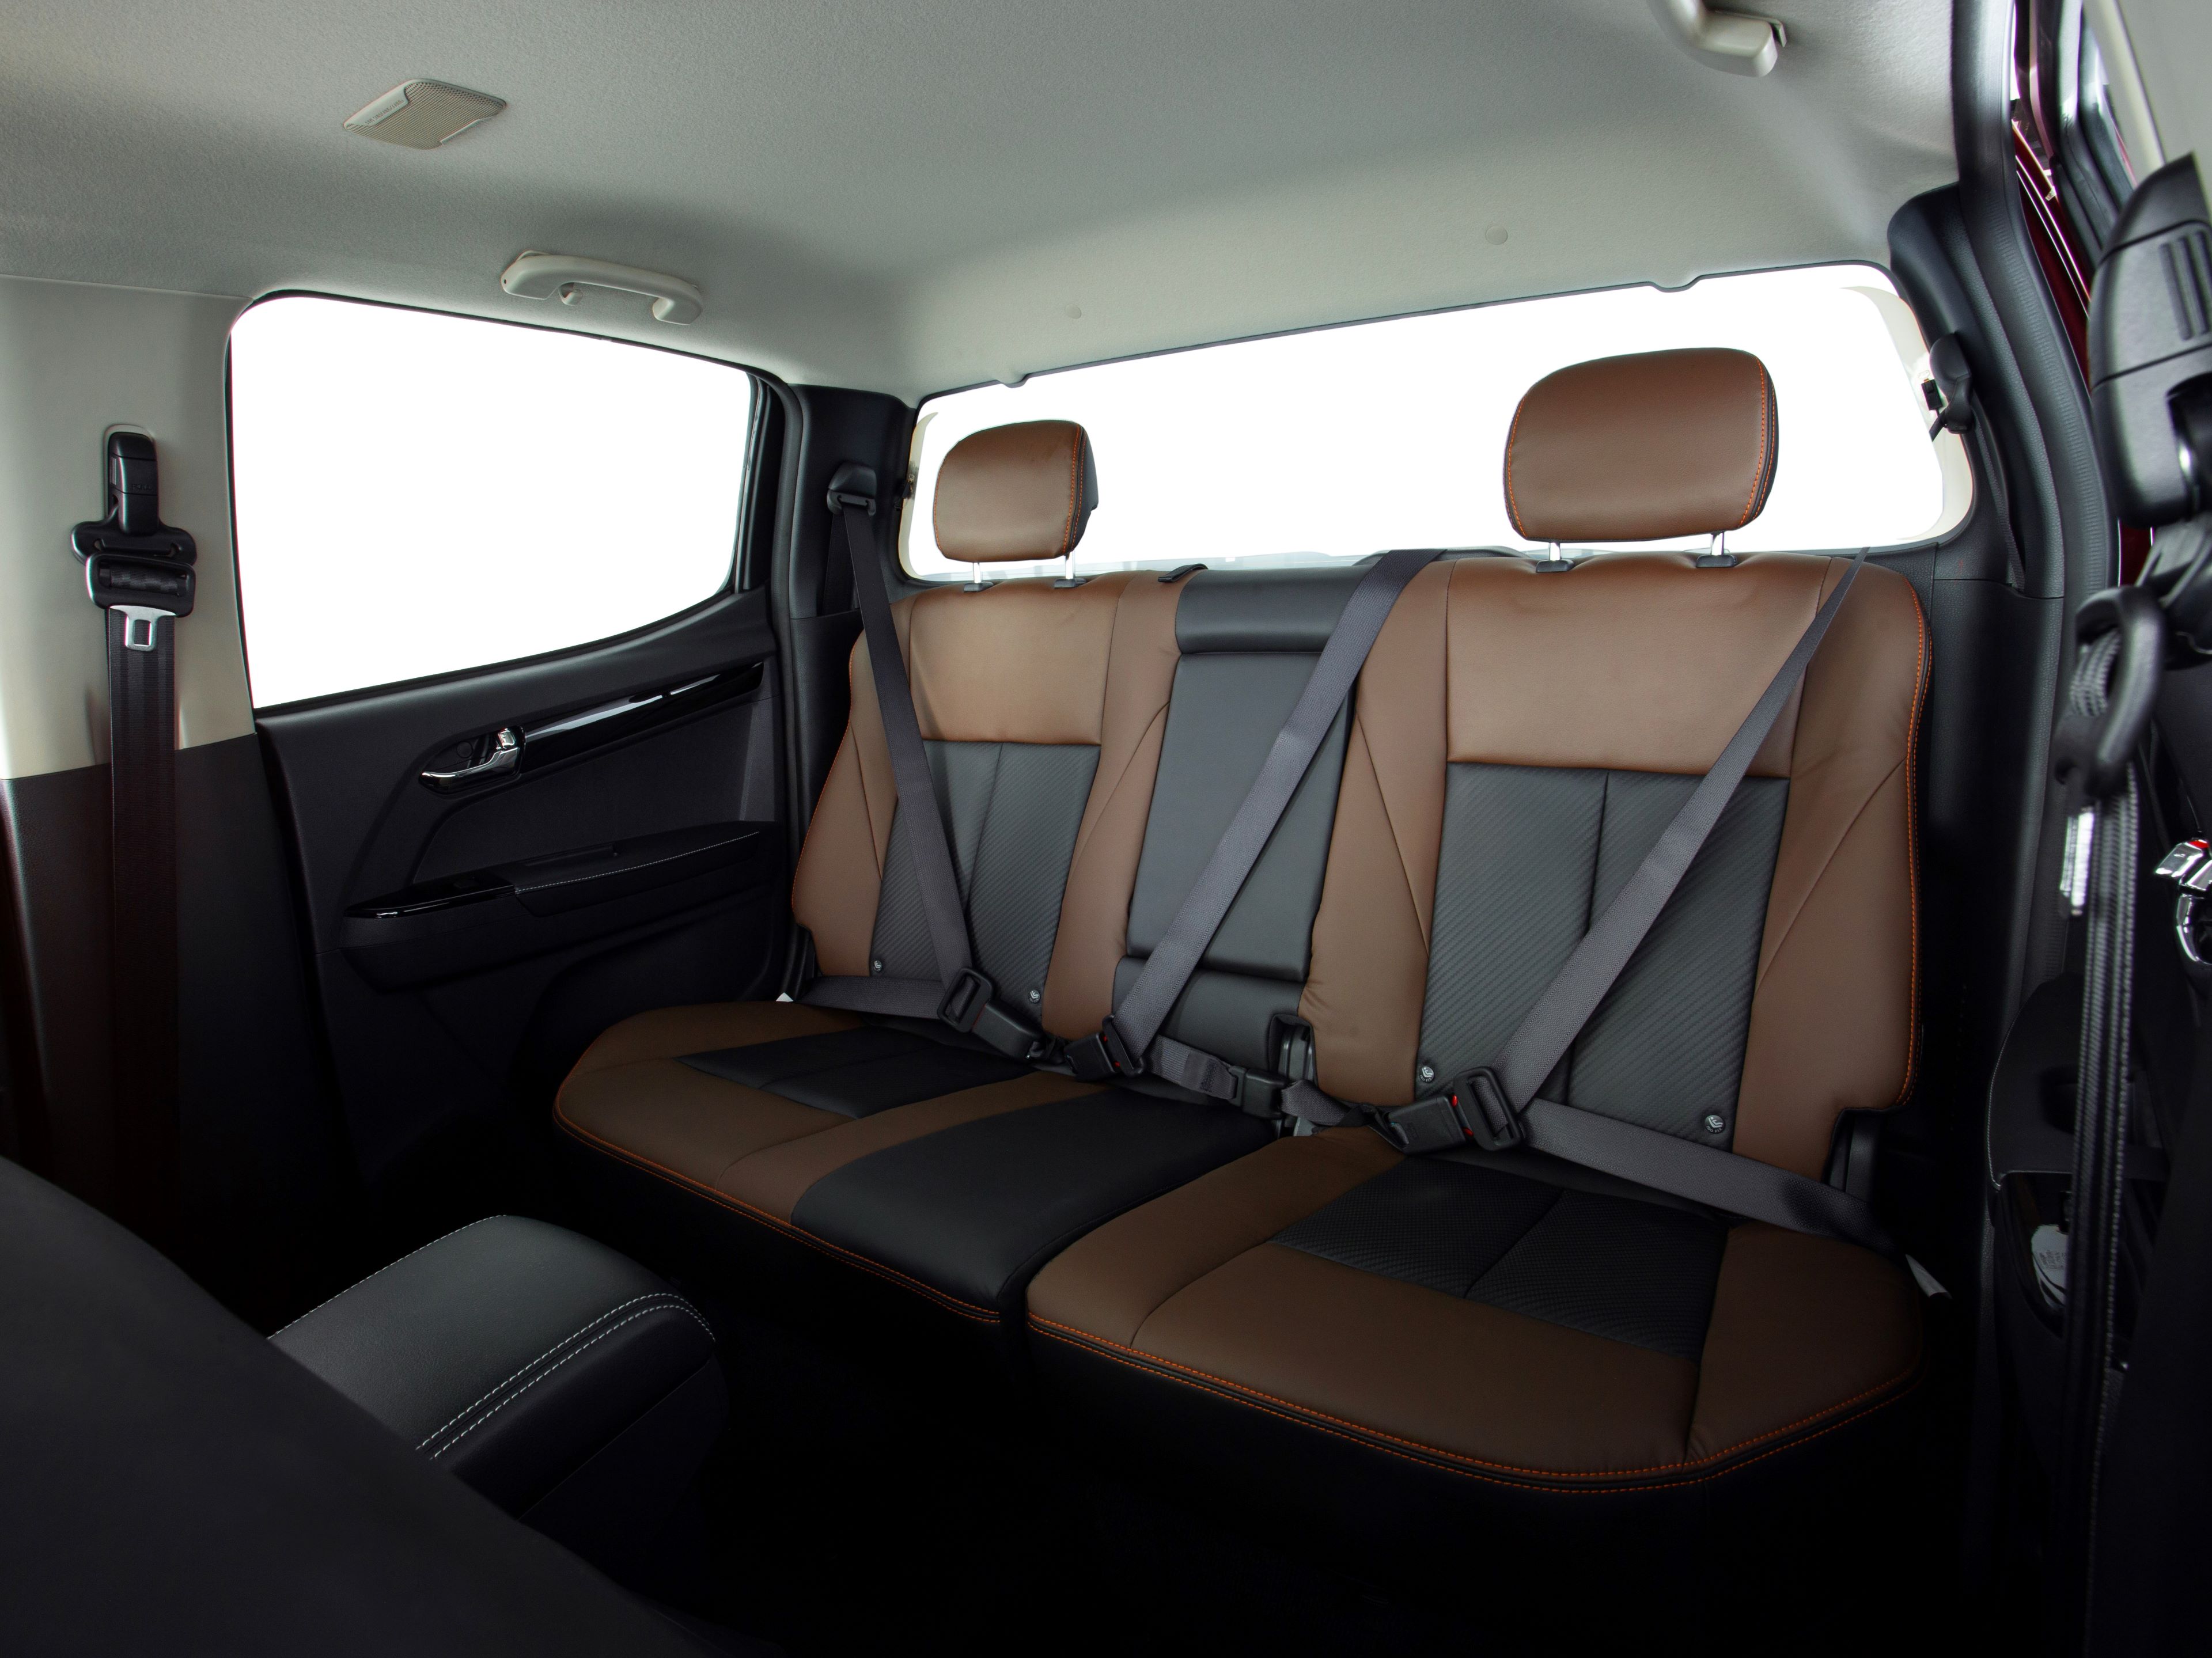 The 2024 Isuzu V Cross now comes with three-point seatbelts as standard, along with a rear seat seatbelt reminder